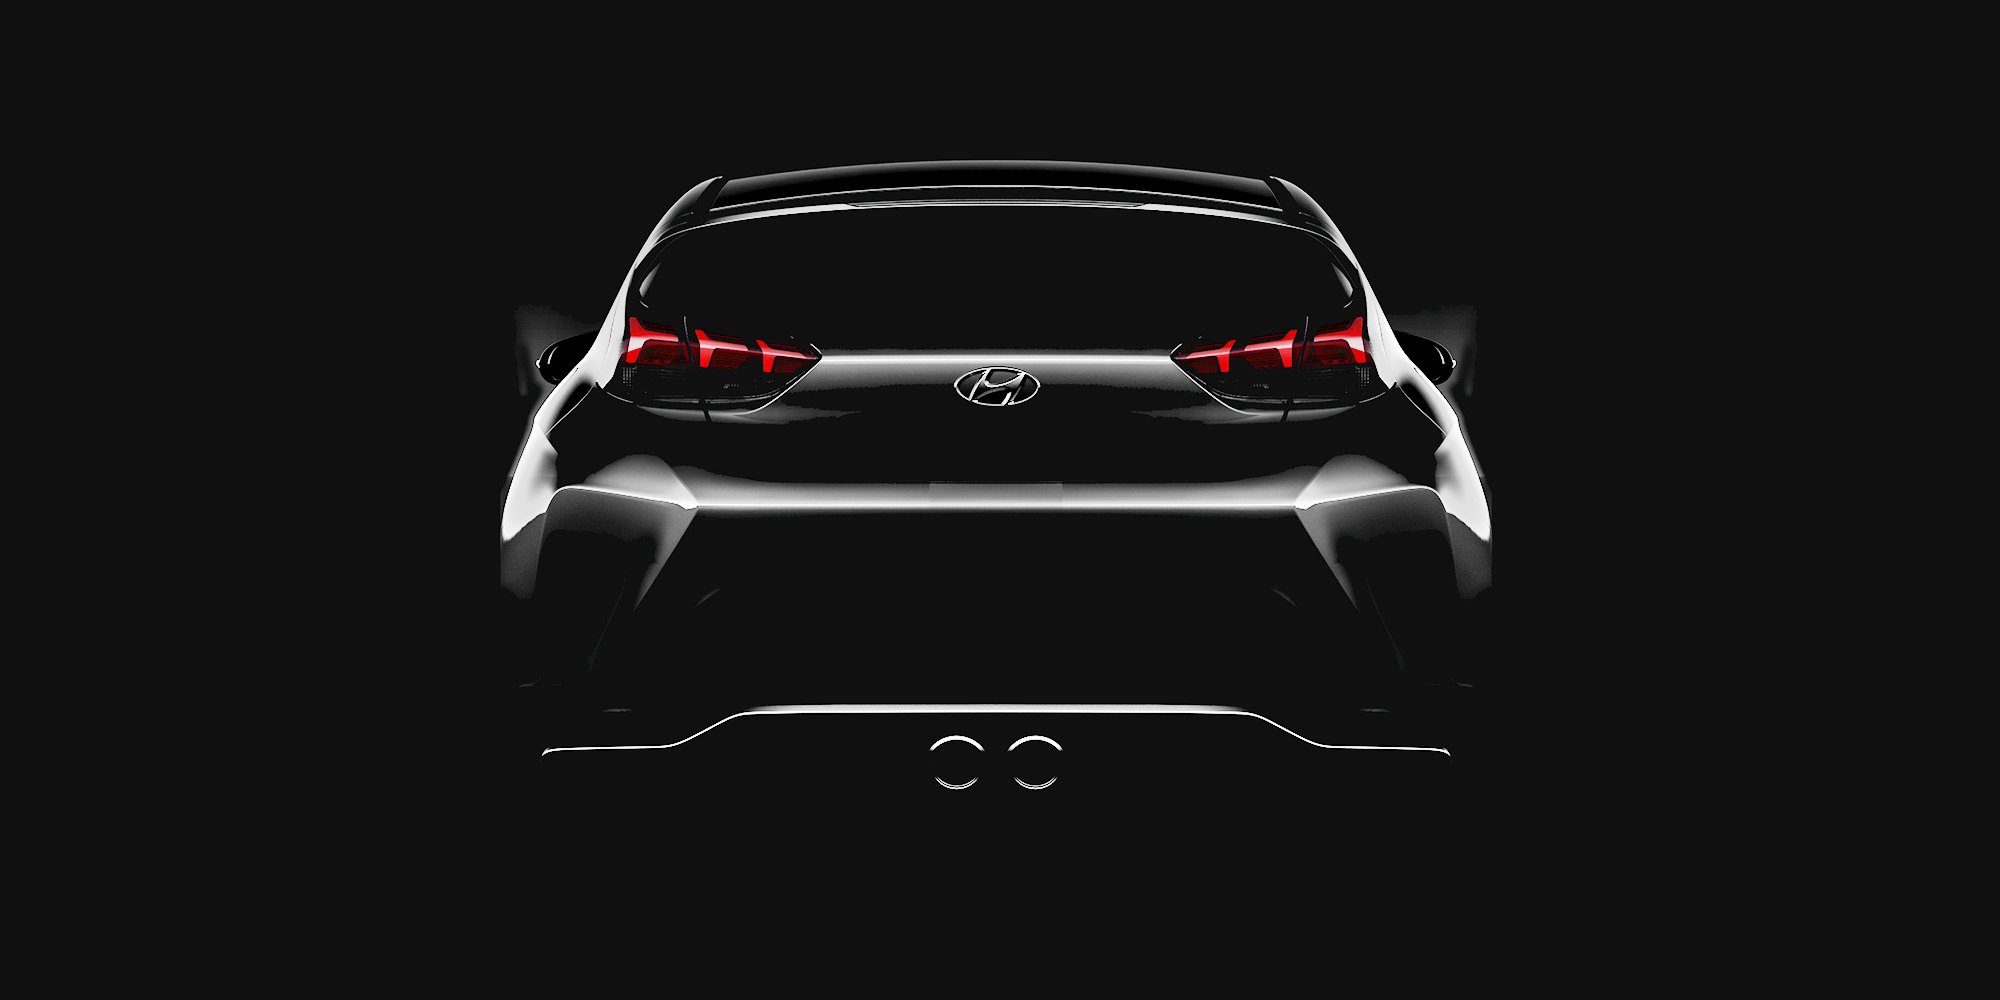 2018 - [Hyundai] Veloster II - Page 3 2018-hyundai-veloster-teaser-All-new-Veloster-Rendering-2